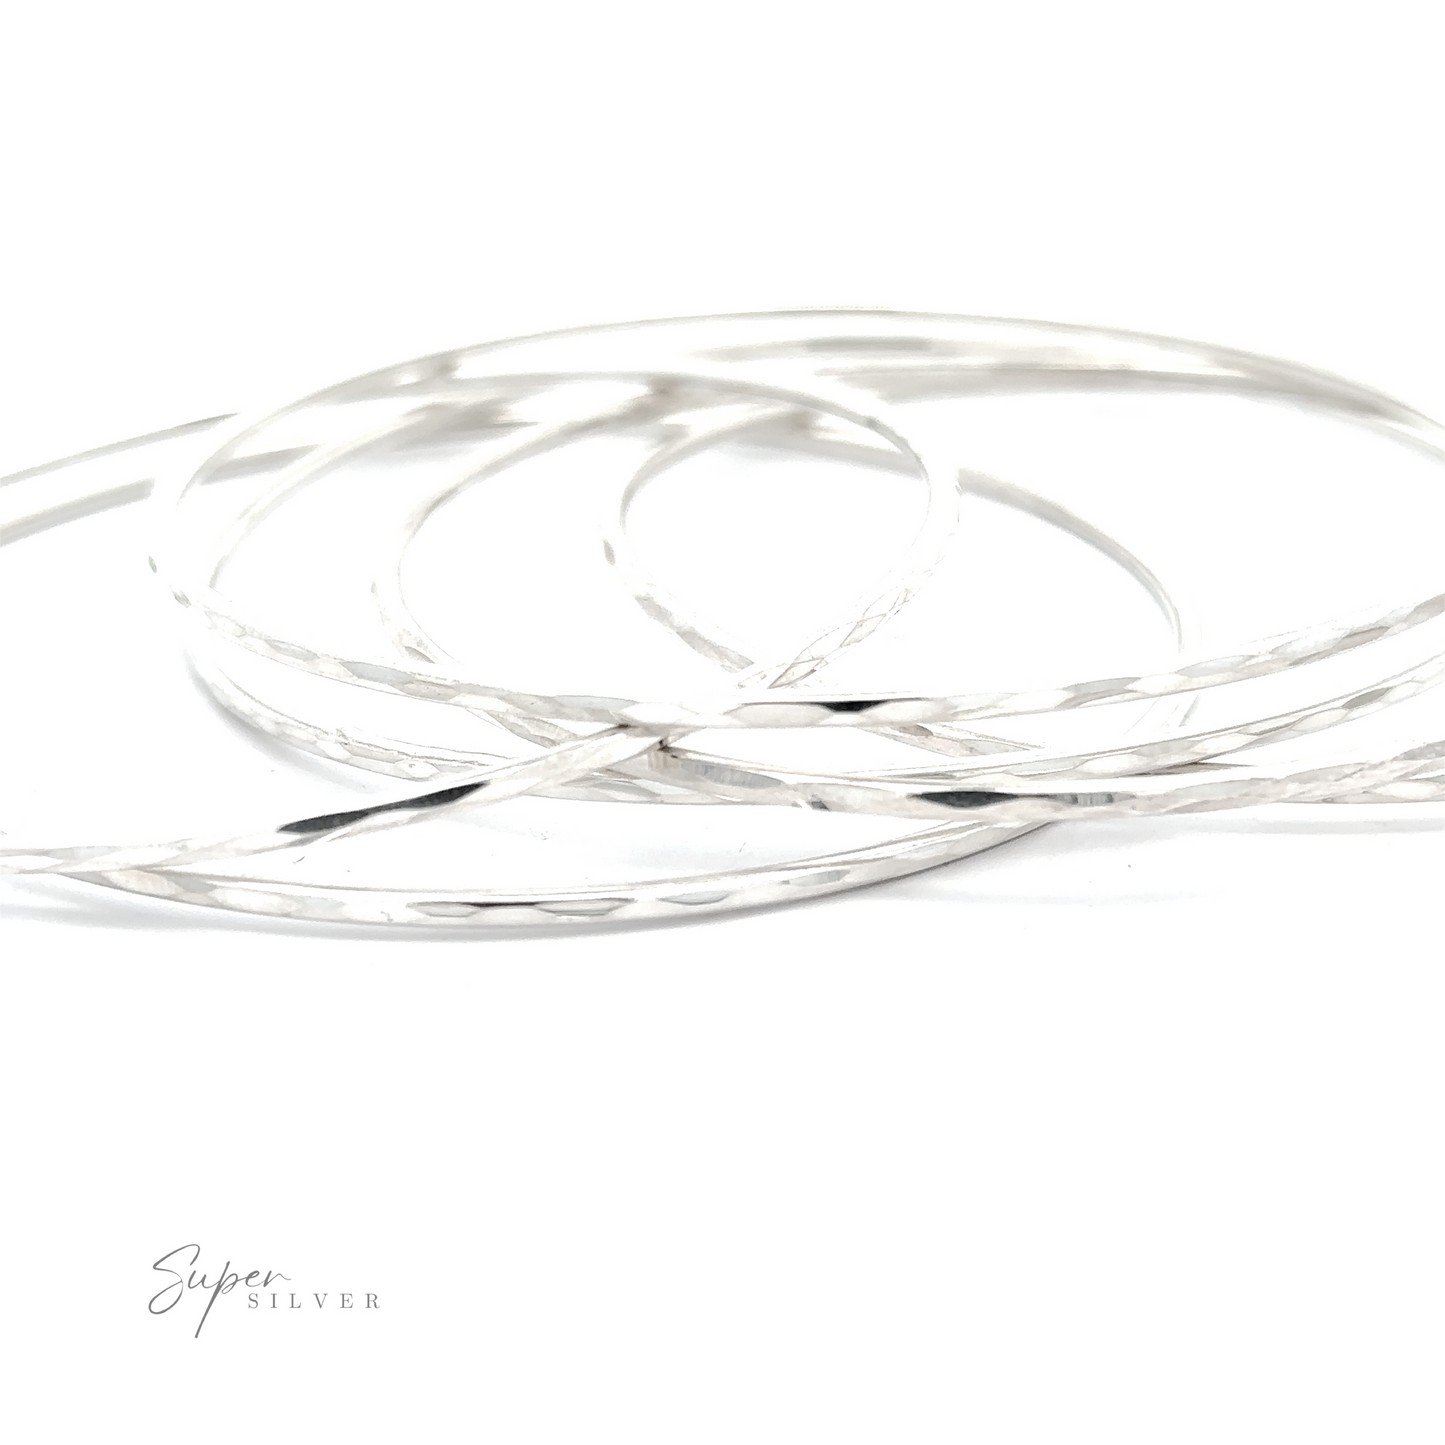 An Elegant Faceted Bangle Bracelet that sparkle on a white surface.